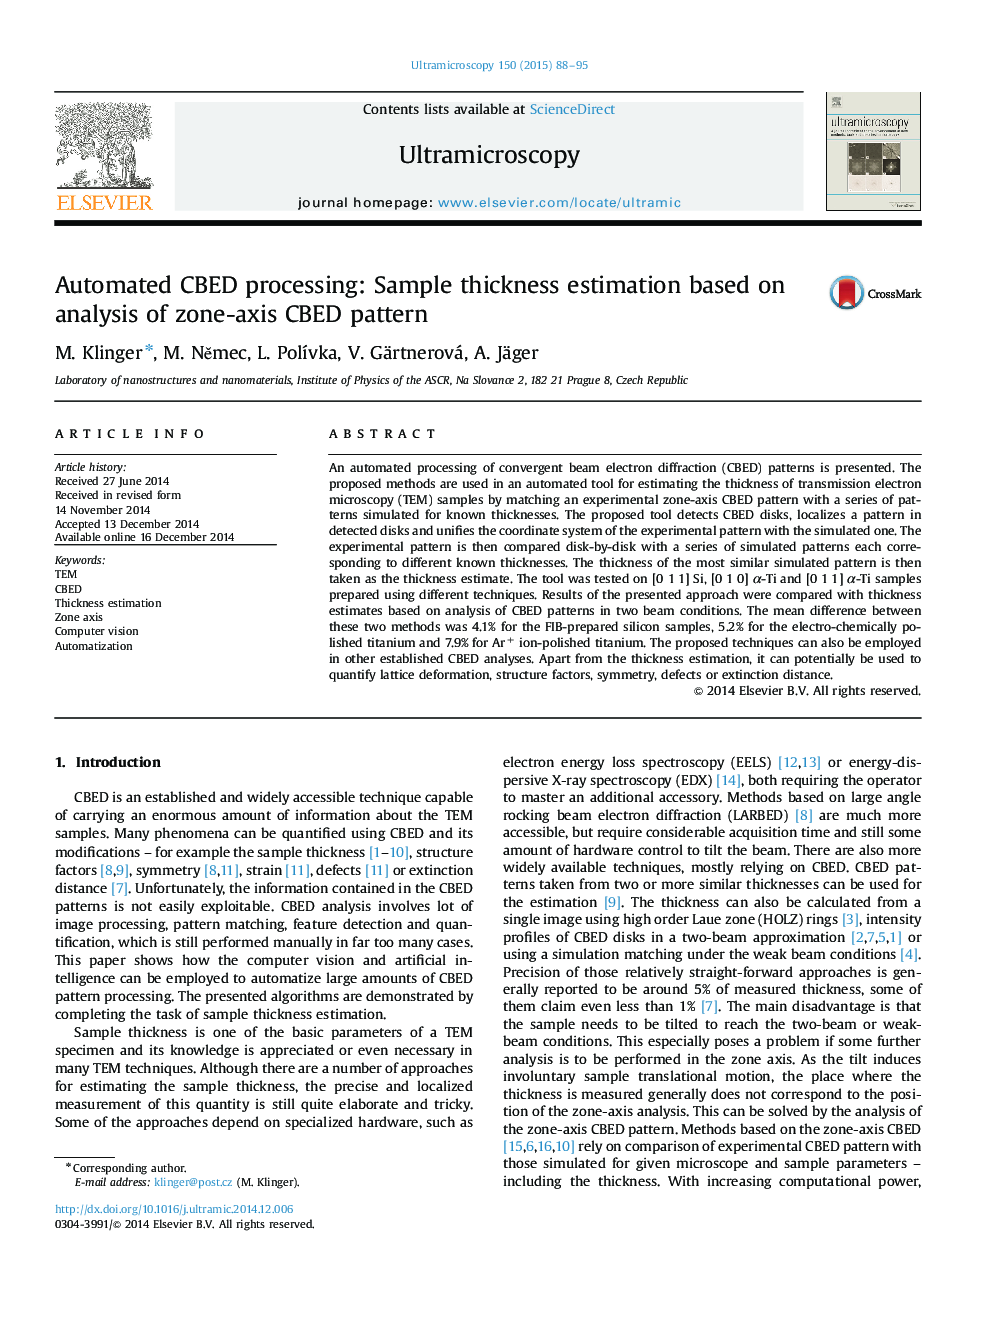 Automated CBED processing: Sample thickness estimation based on analysis of zone-axis CBED pattern